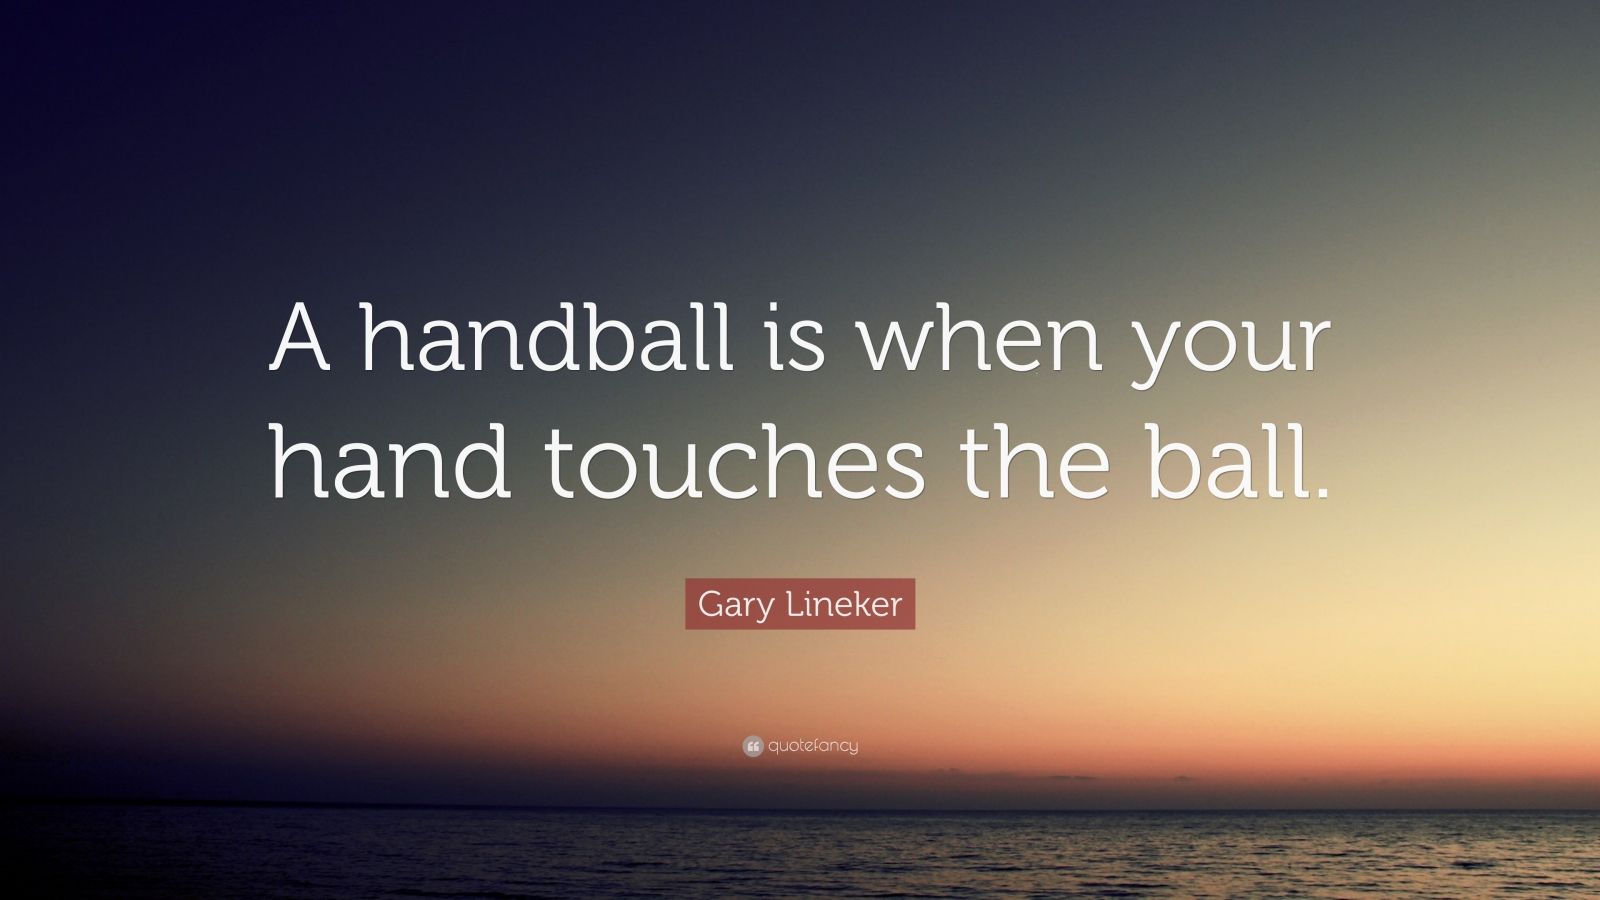 Gary Lineker Quote: “A handball is when your hand touches the ball.”